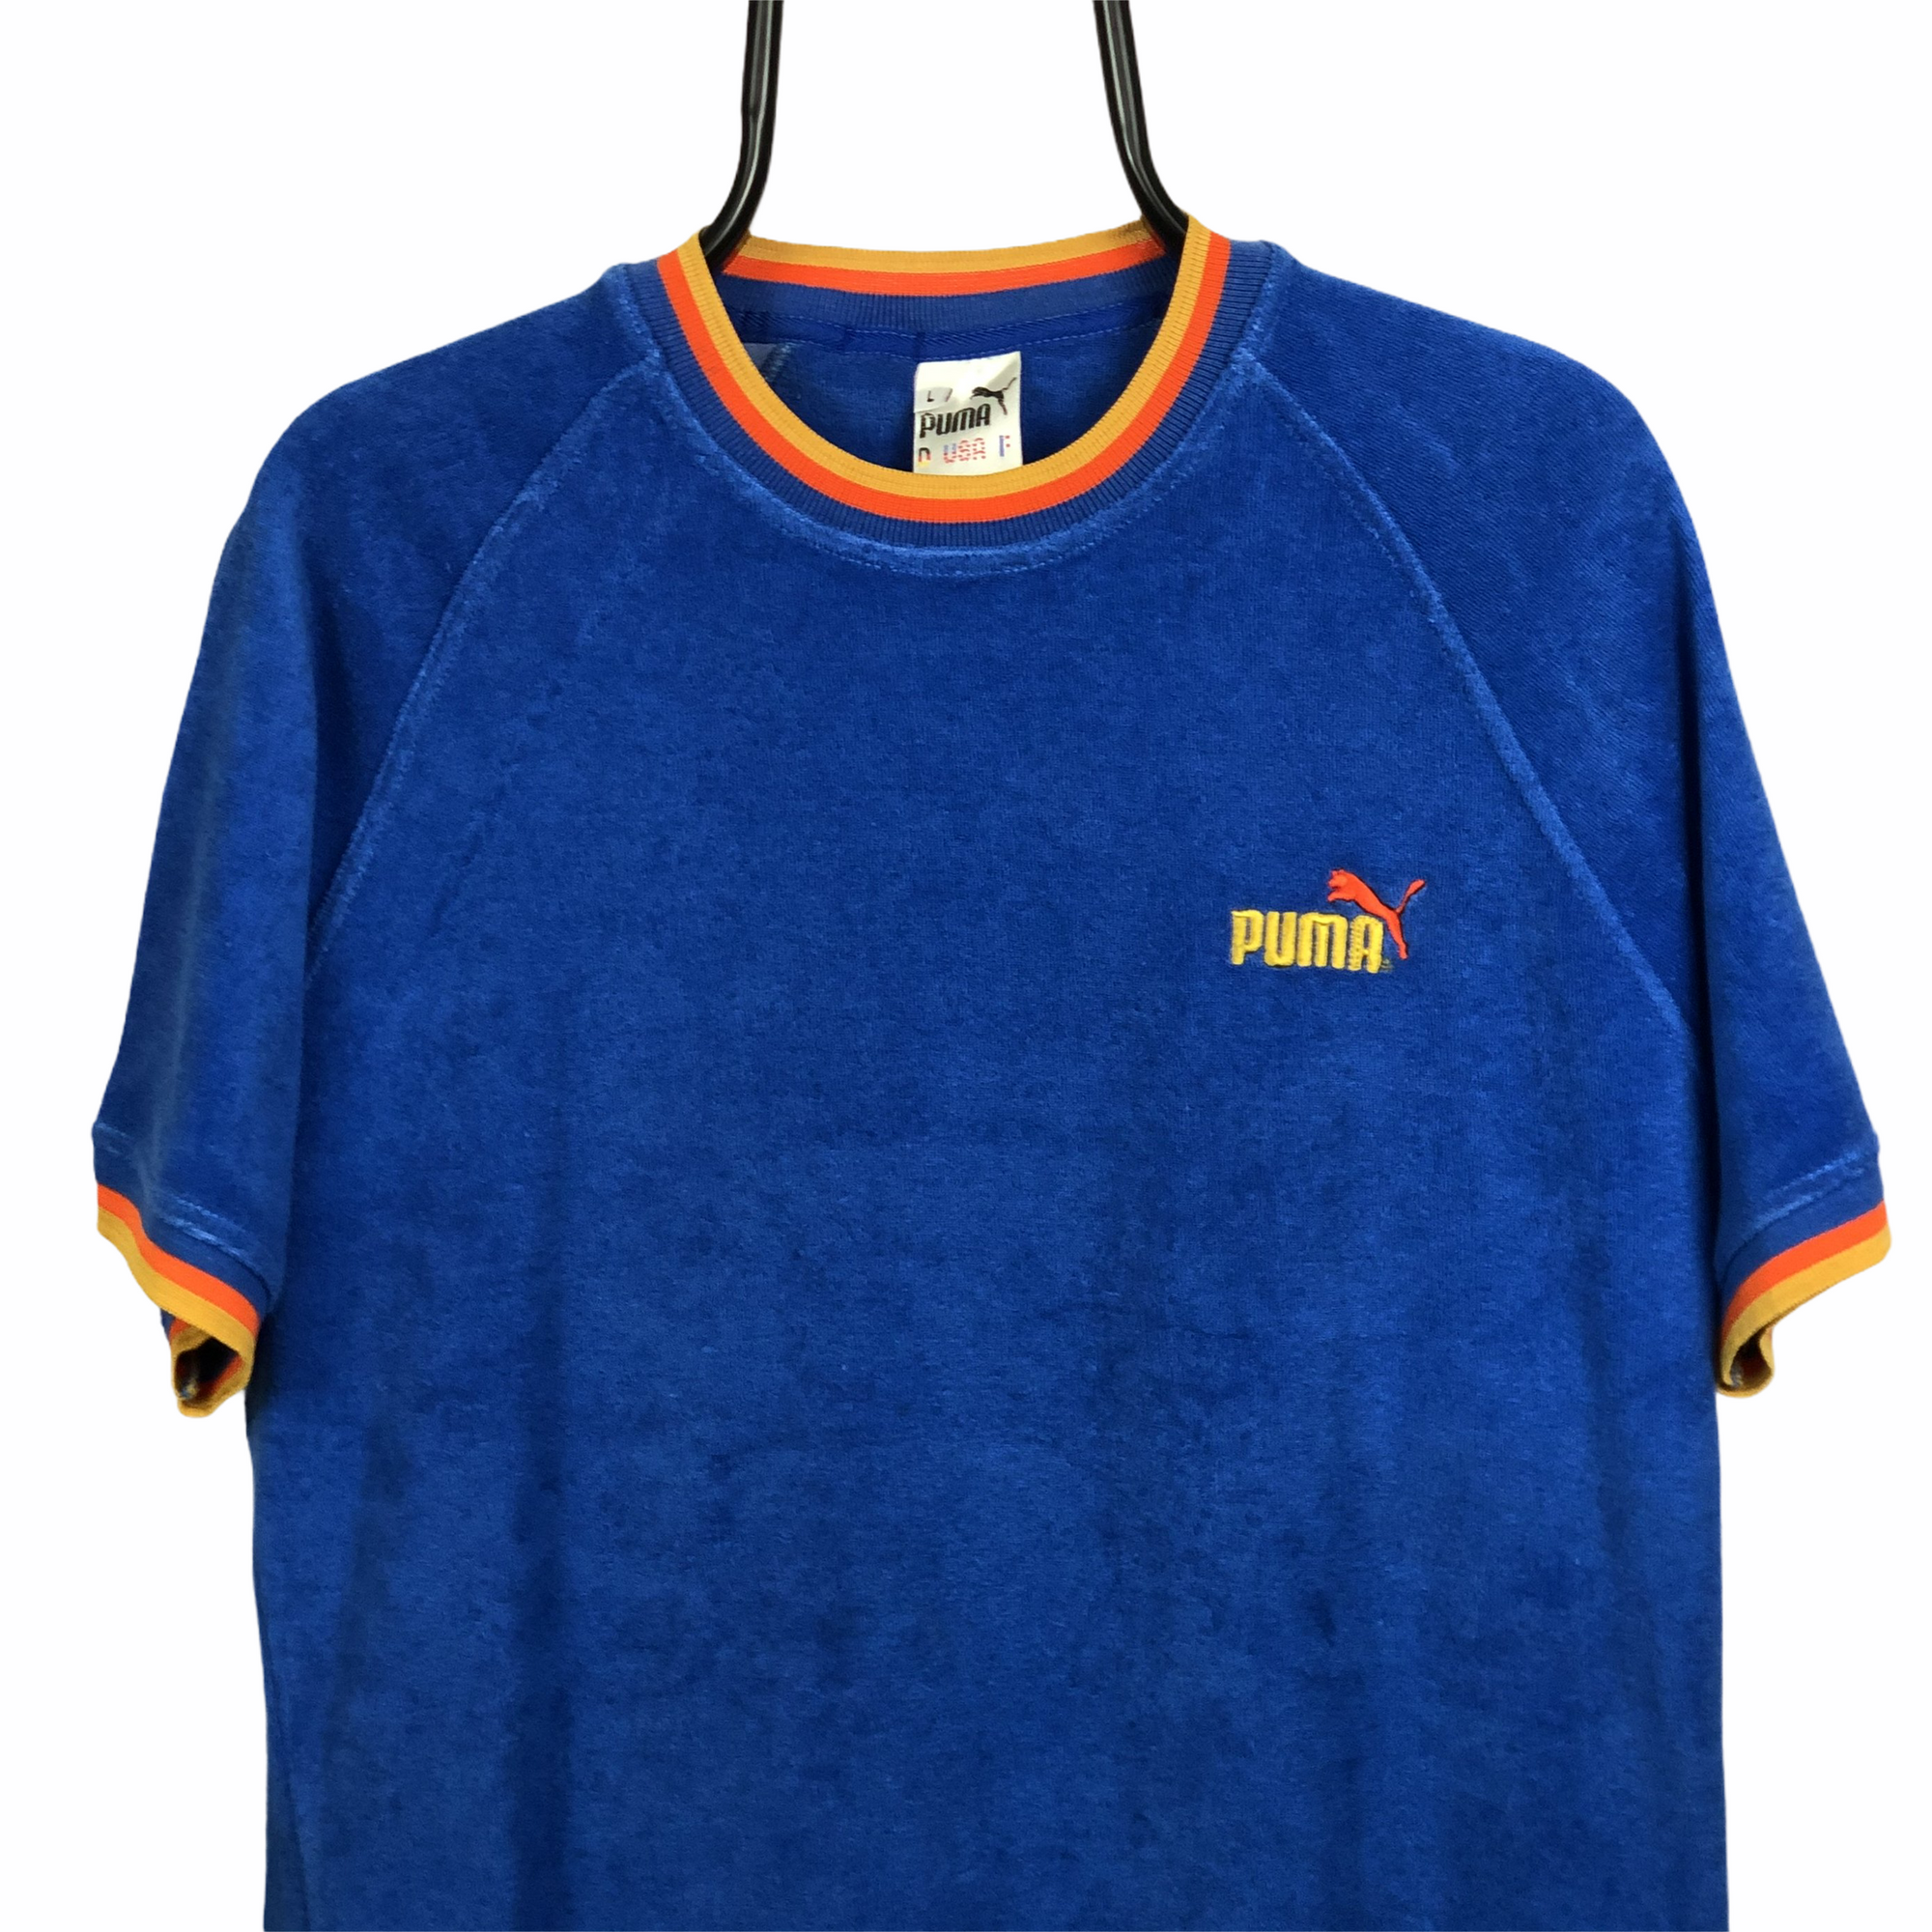 Vintage Puma Embroidered Small Spellout Terry Towelling Tee - Men's Medium/Women's Large